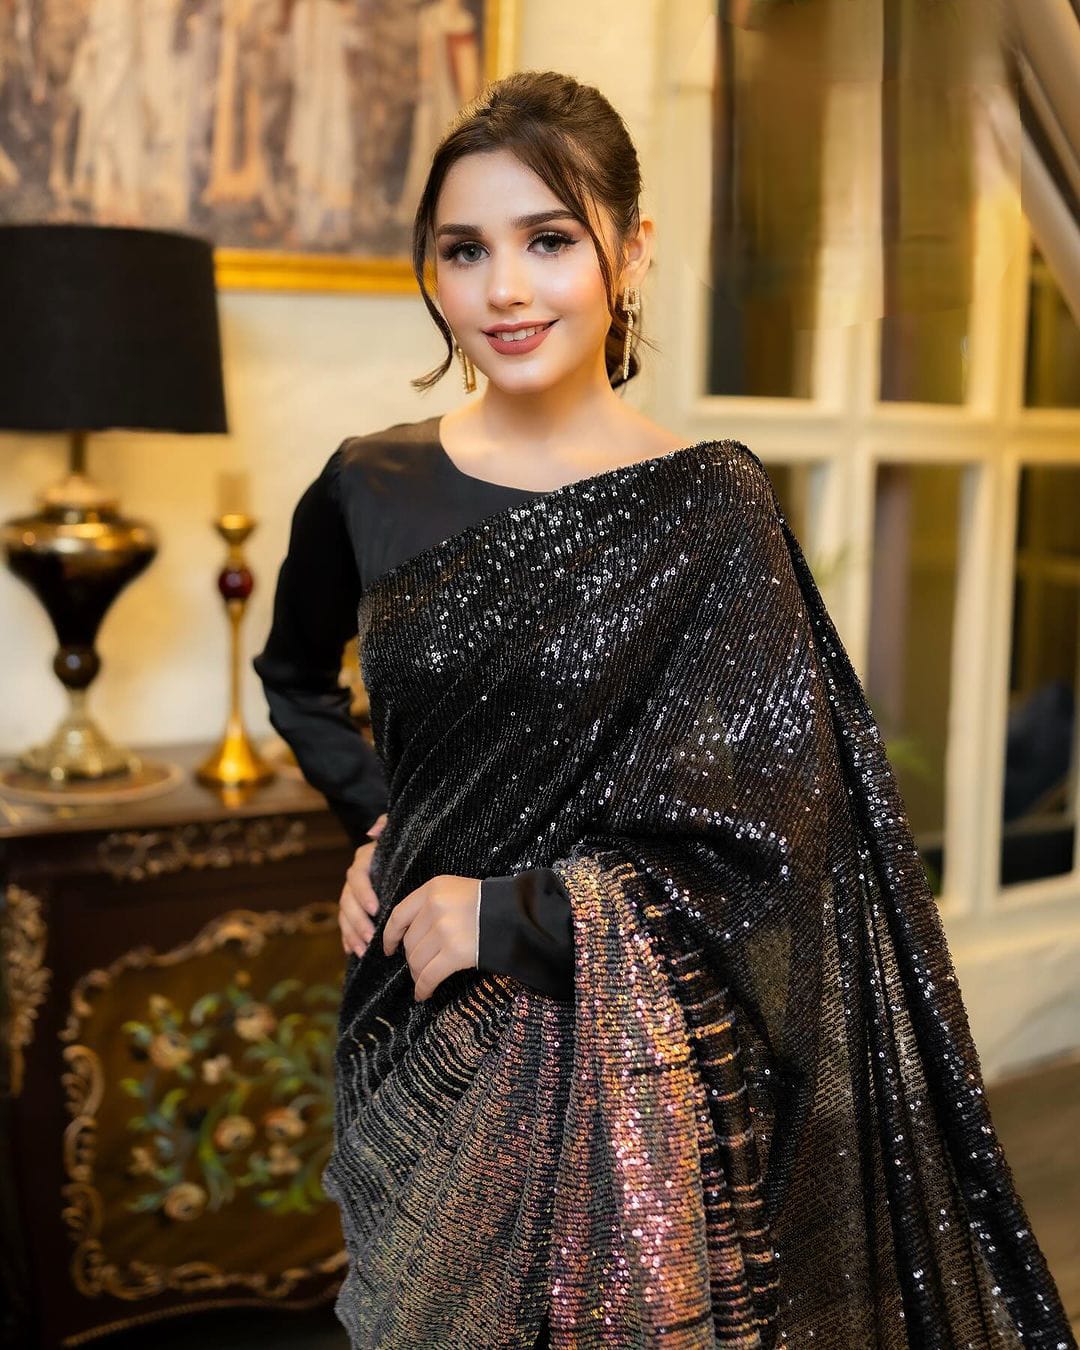 Amazing Black and brown Color Georgette Party Wear Saree